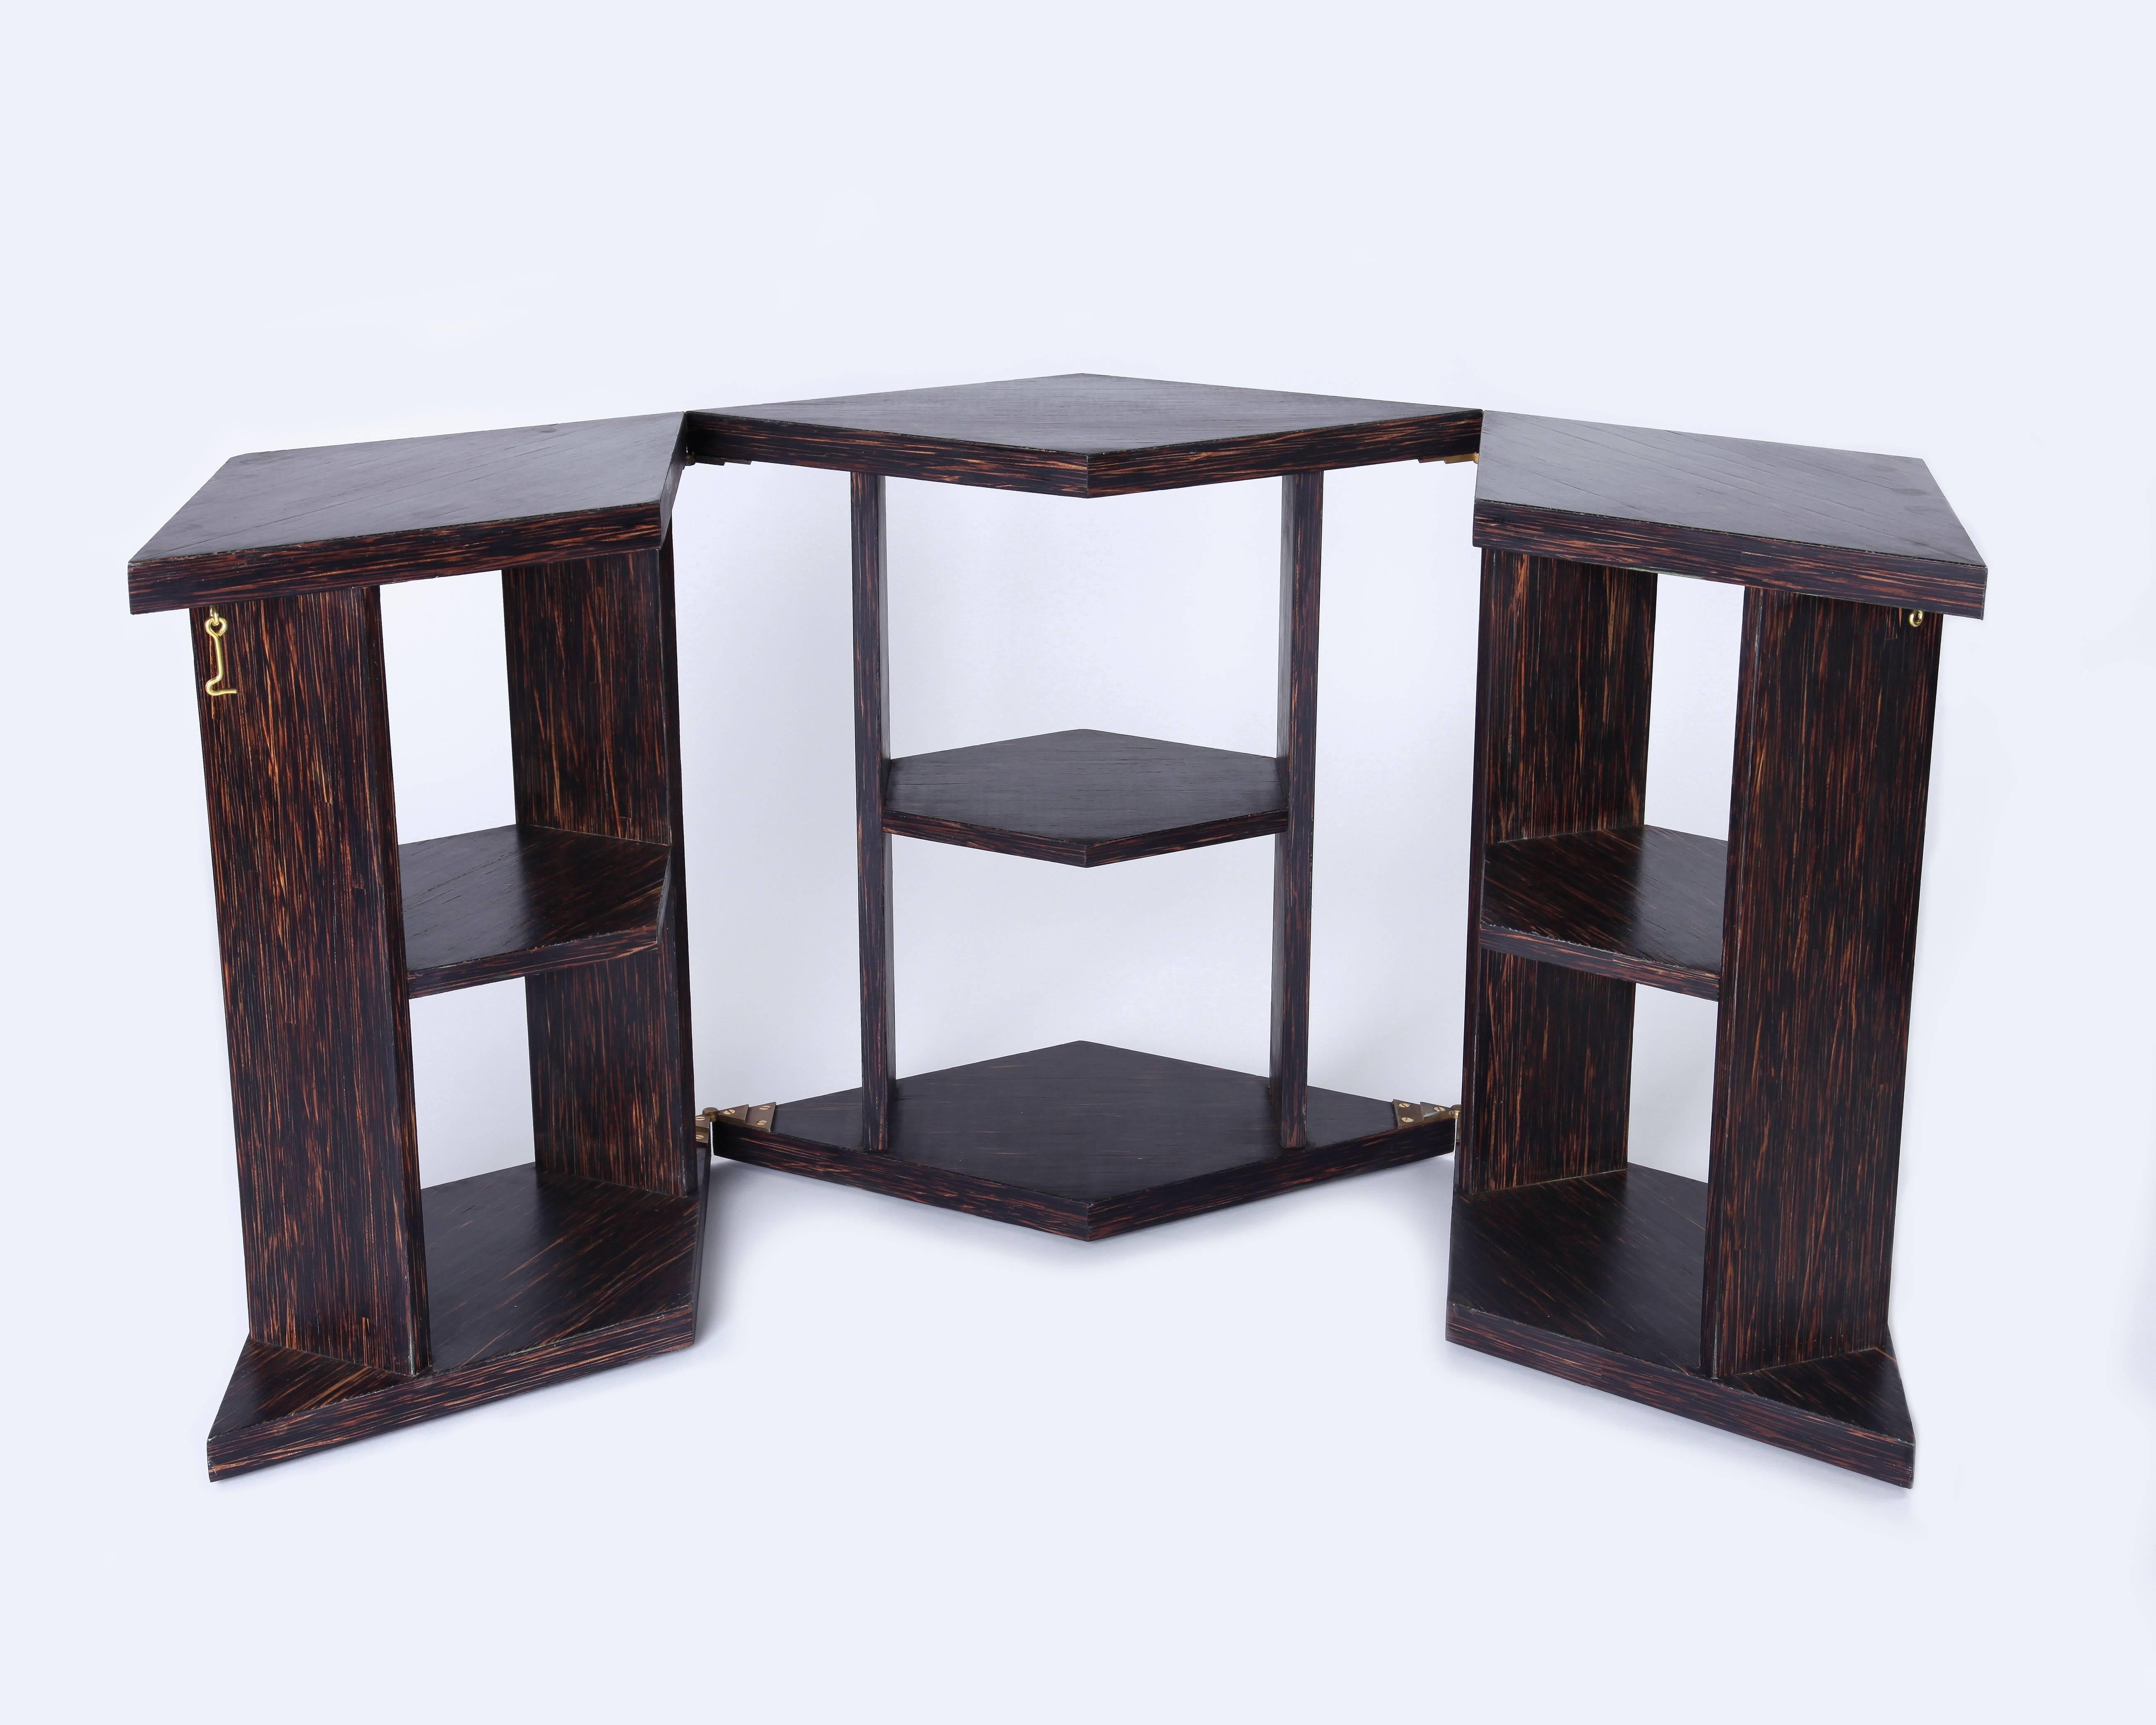 Edition Modern's re-edition of the three elements table or bookcase designed by Eugene Printz, in 1928.
Shown in satin palm wood. Other wood and finishes available.
Solid brass hinges.
Made to order. Production time is approx. 8/10 weeks
Also